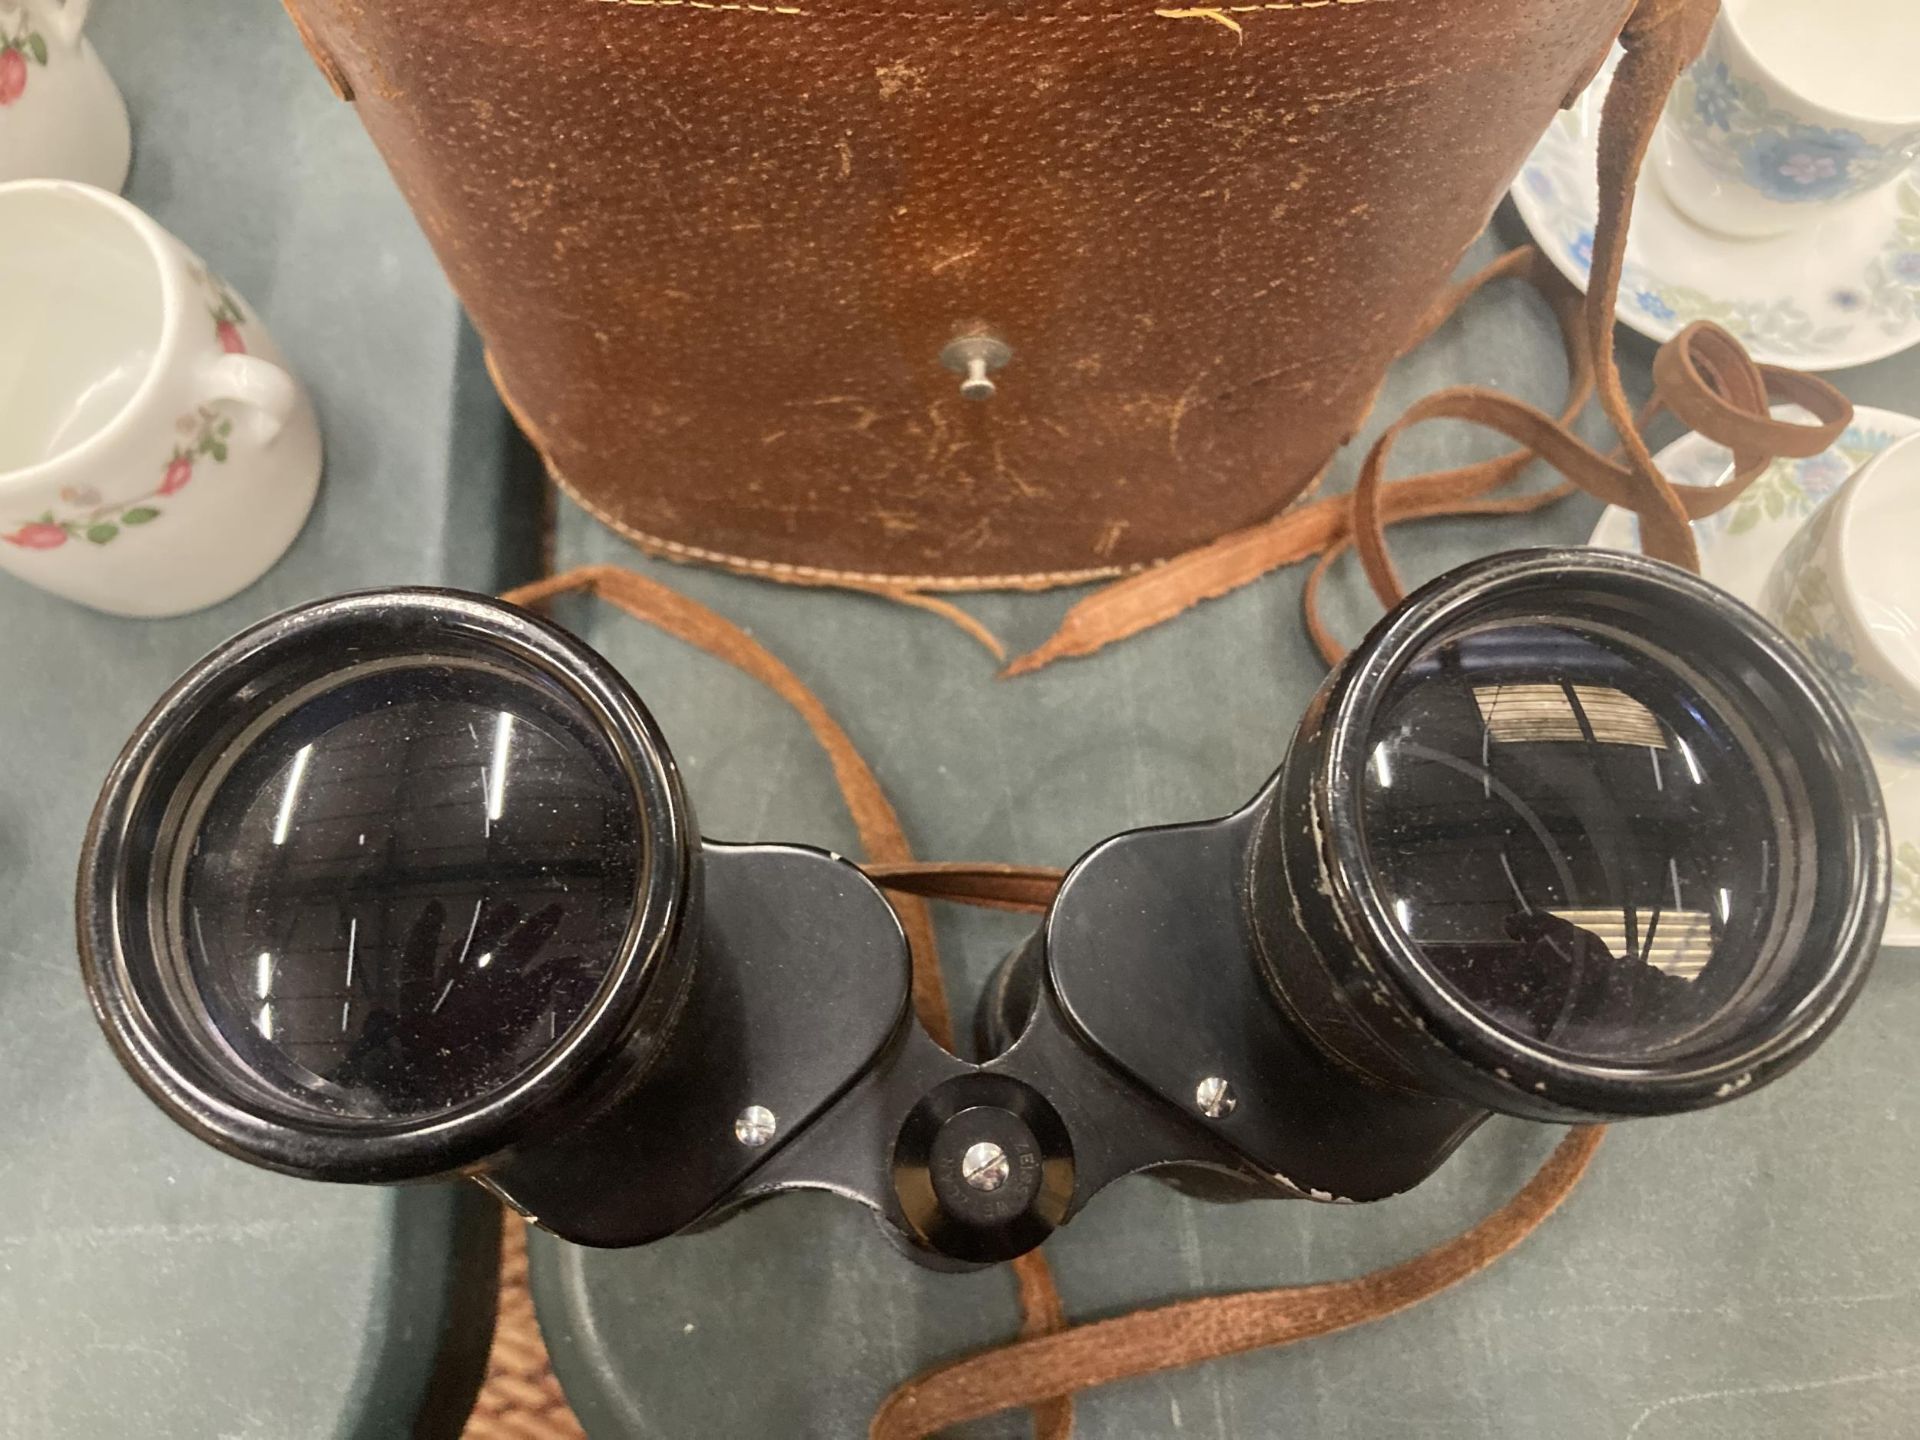 A PAIR OF ZENITH 7 X 50 FIELD BINOCULARS IN A LEATHER CASE - Image 3 of 5